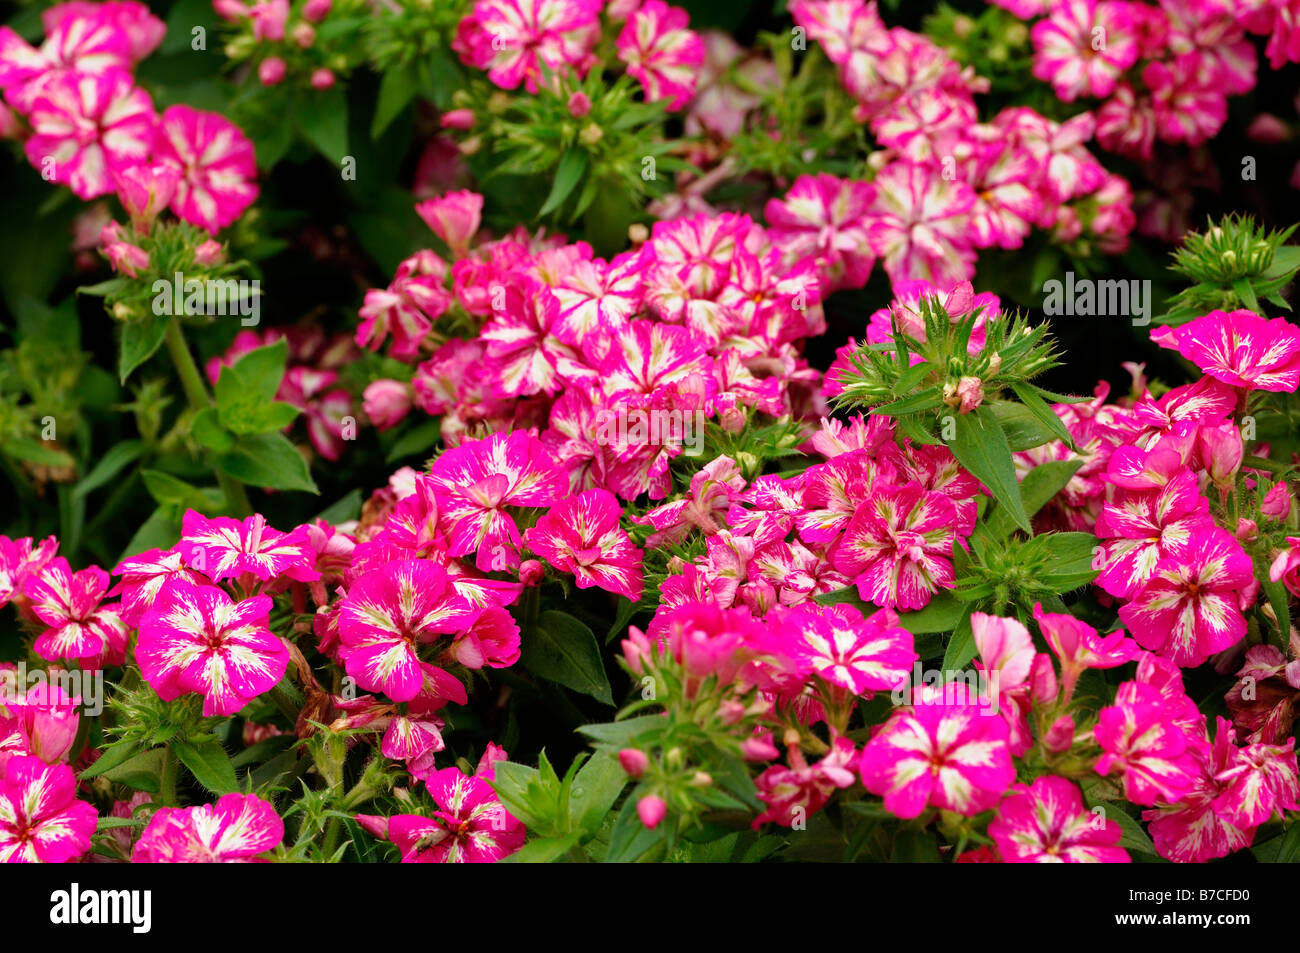 Phlox drummondii grammy pink white flower closeup close up macro bloom blossom annual bedding container plant Stock Photo